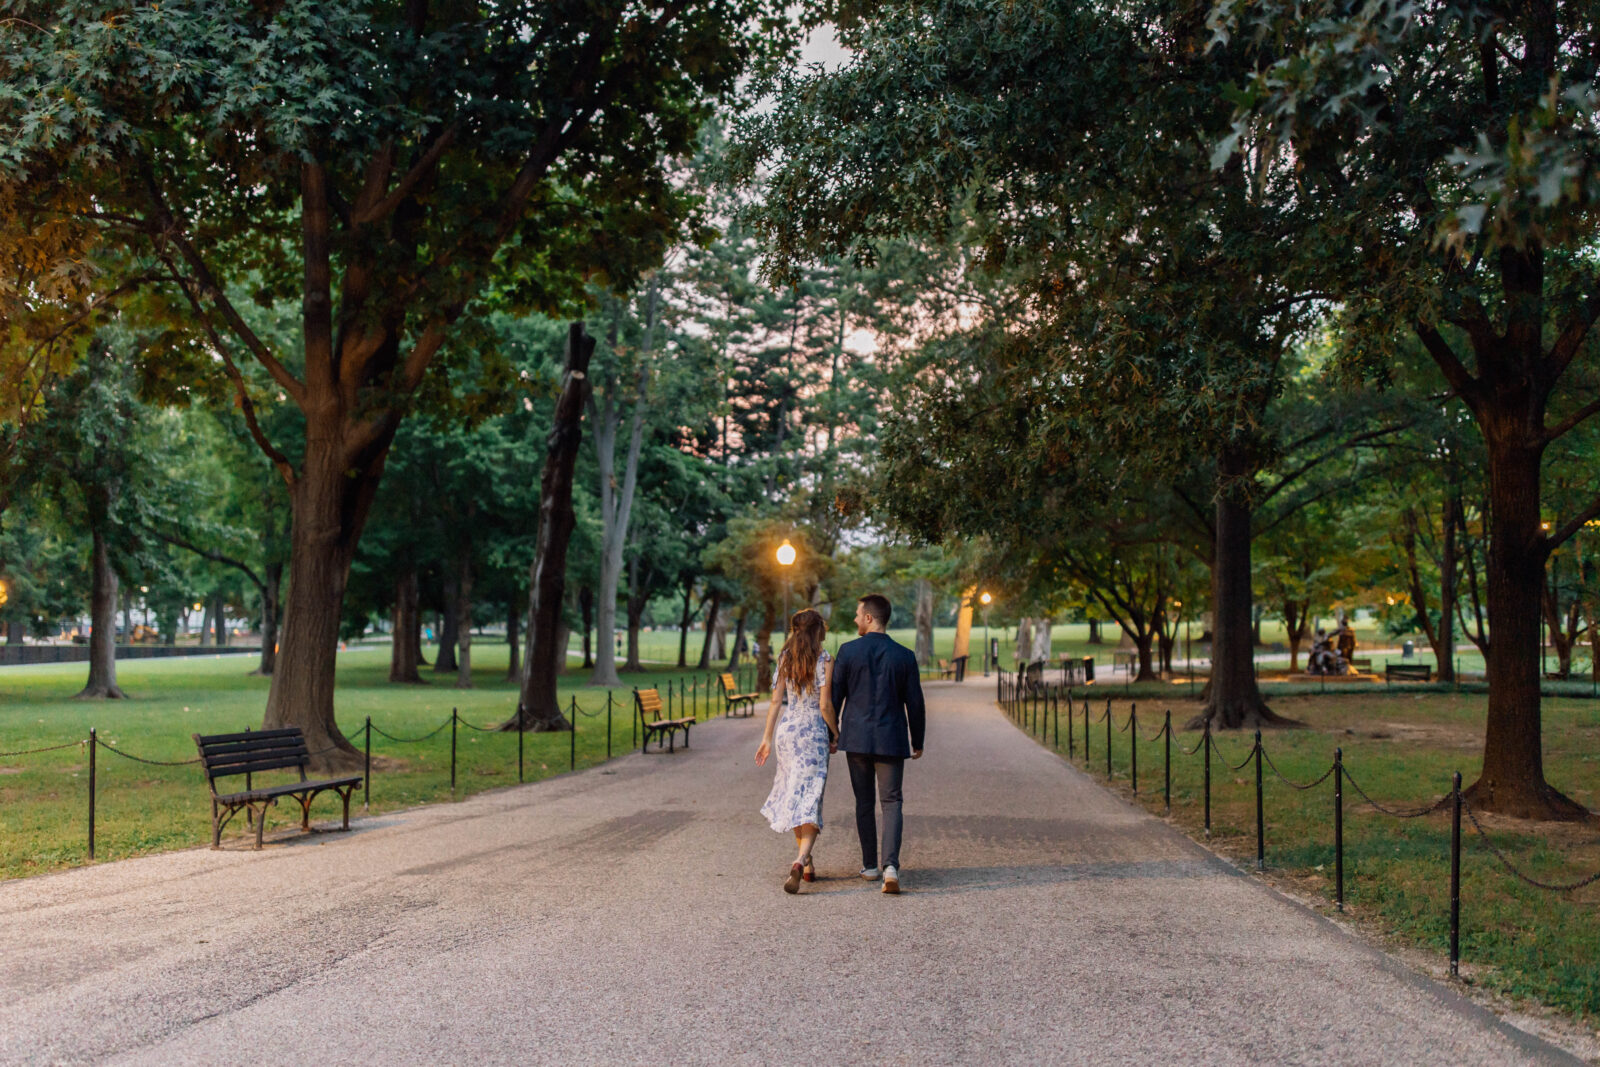 Romantic walk in the park during Washington D.C. Engagement Photo Session. True to color, cinematic photography